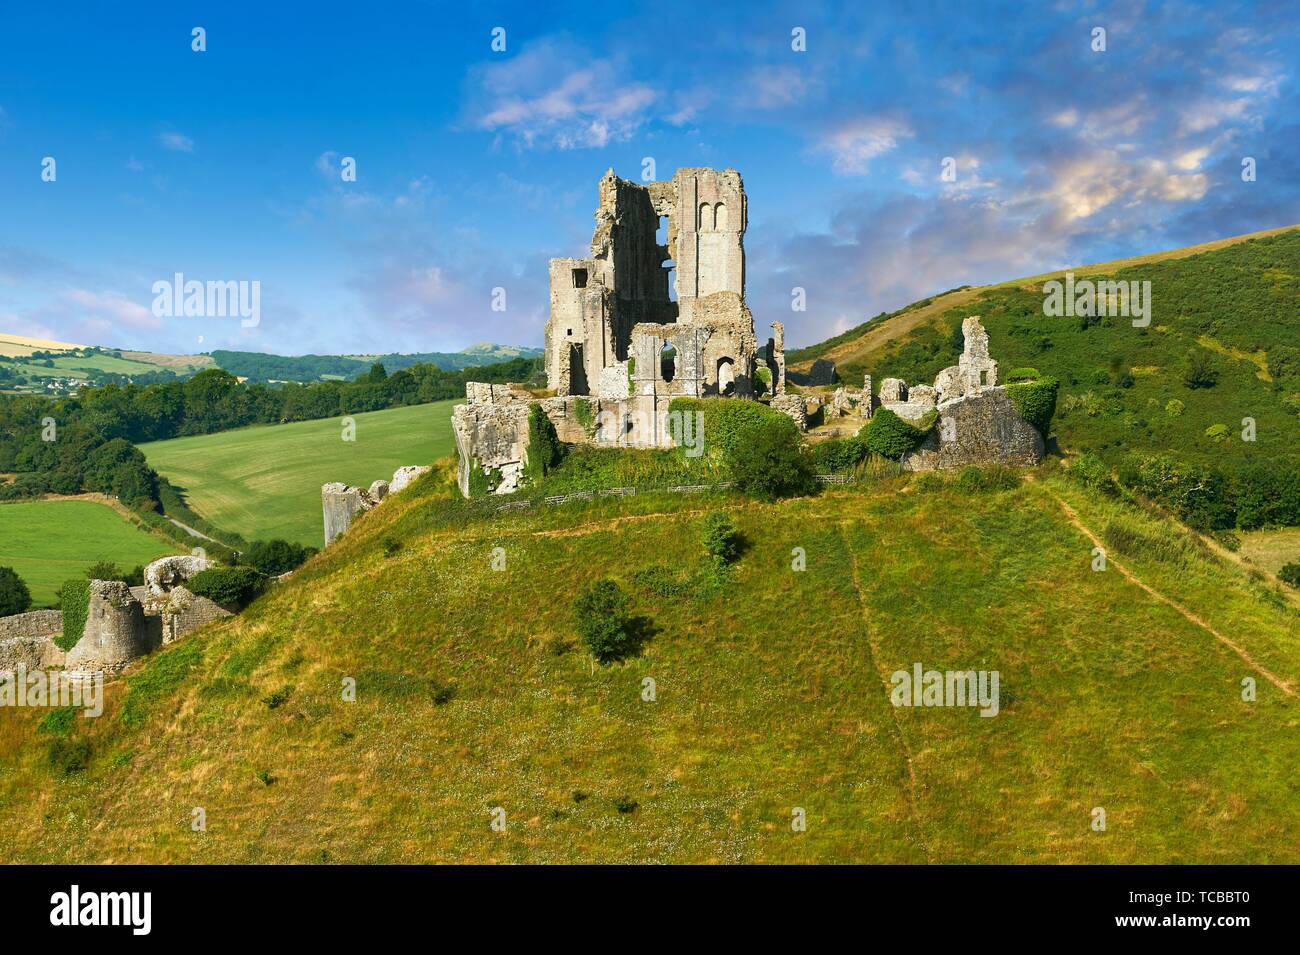 Medieval Corfe castle keep & battlements at sunrise, built in 1086 by William the Conqueror, Dorset England. Stock Photo